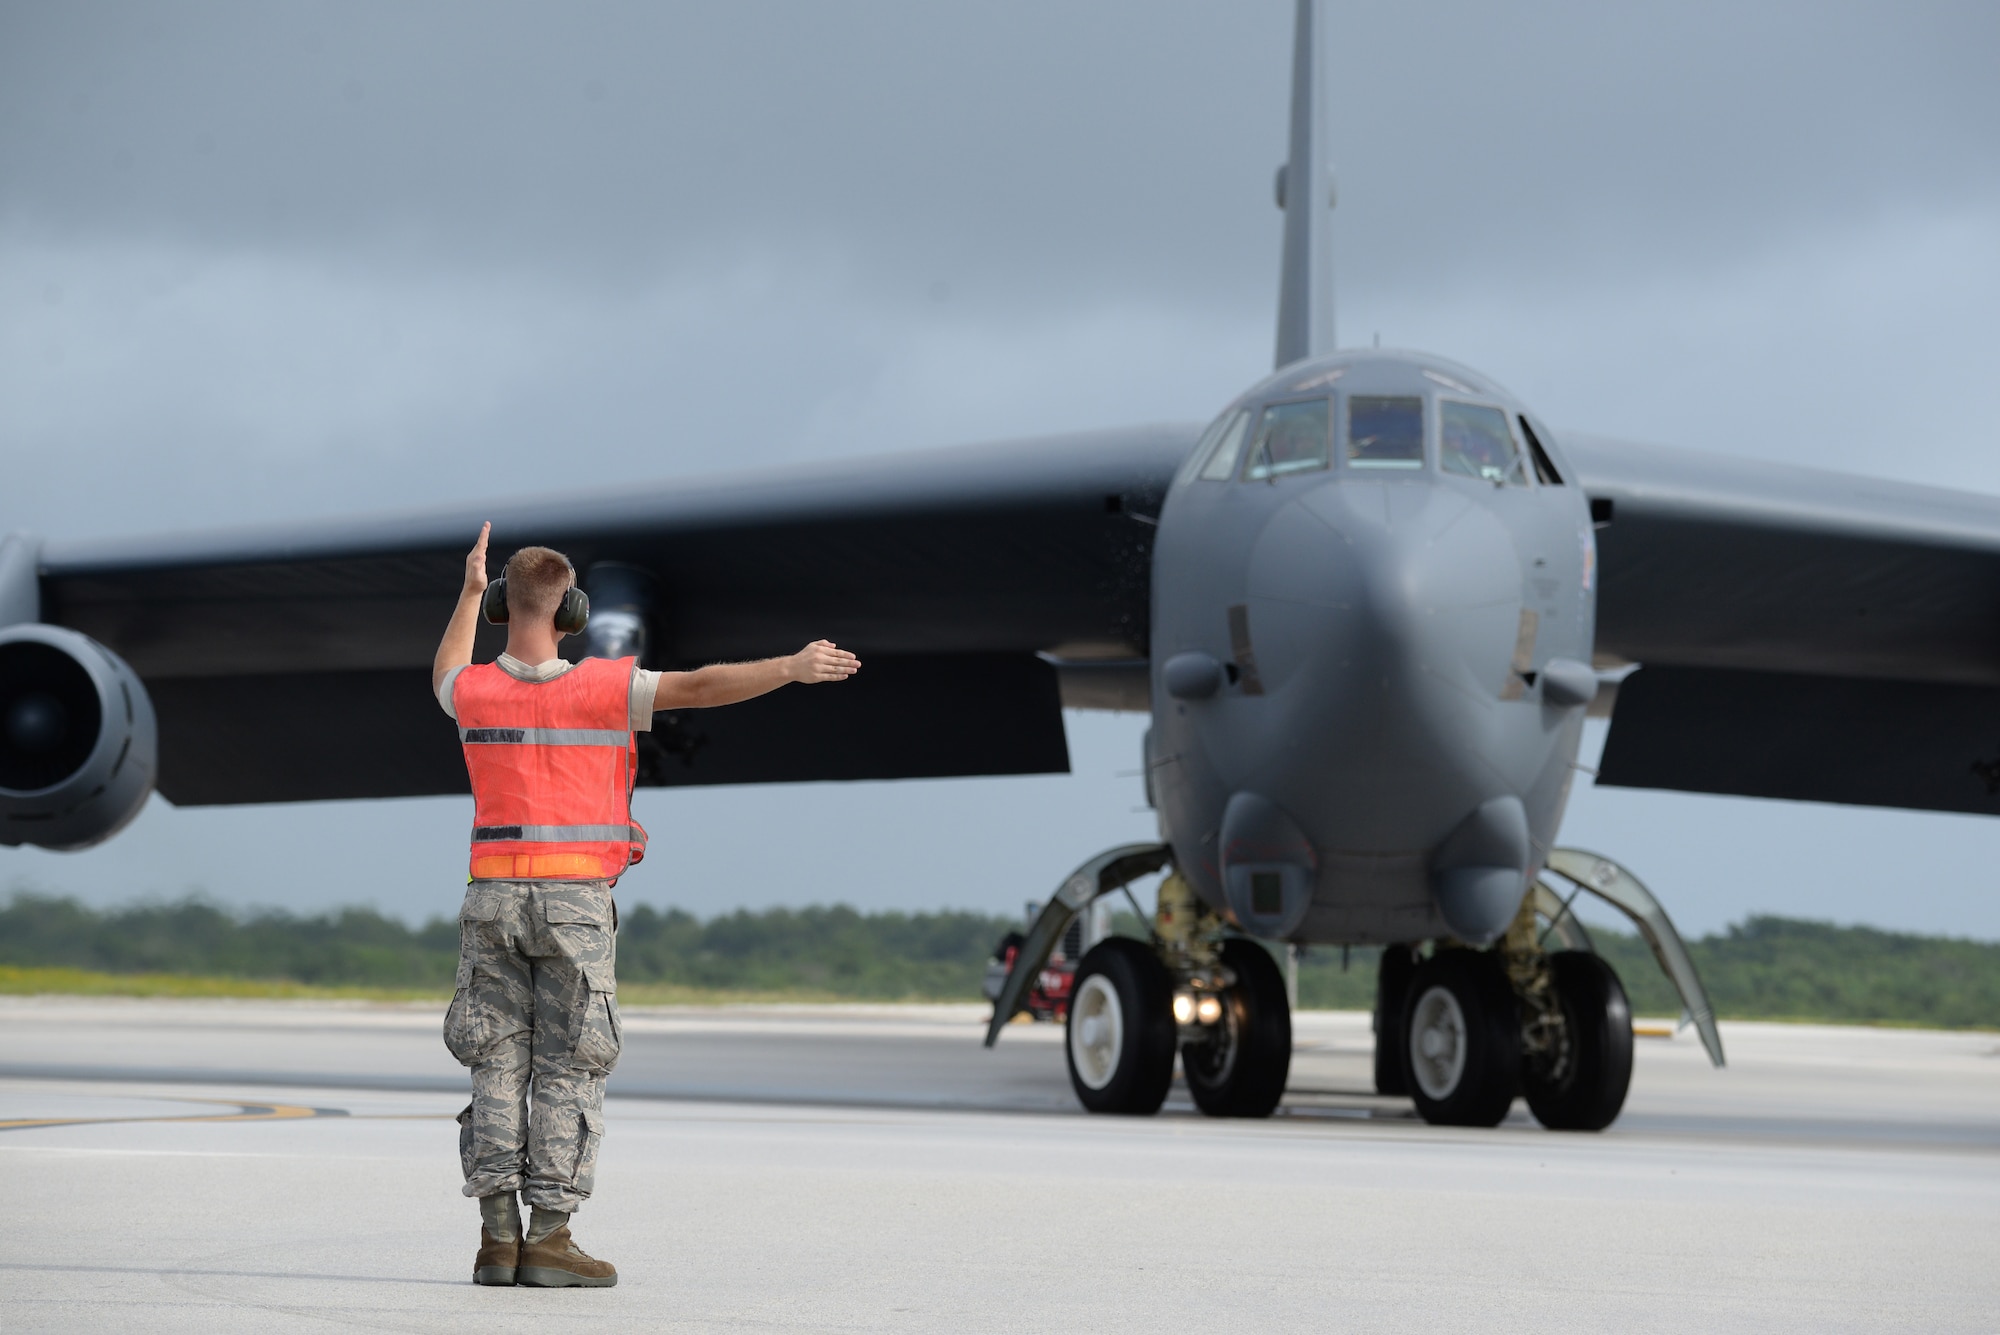 Senior Airman Logan Chufar, a 36th Expeditionary Aircraft Maintenance Squadron crew chief deployed from Minot Air Force Base, N.D., marshals a B-52 Stratofortress at Andersen Air Force Base, Guam, Aug. 24, 2016. The B-52s have served non-stop rotations since 2006, which have been shared between the bomber squadrons from Minot AFB, N.D., and Barksdale AFB, La. (U.S. Air Force photo by Airman 1st Class Jacob Skovo)